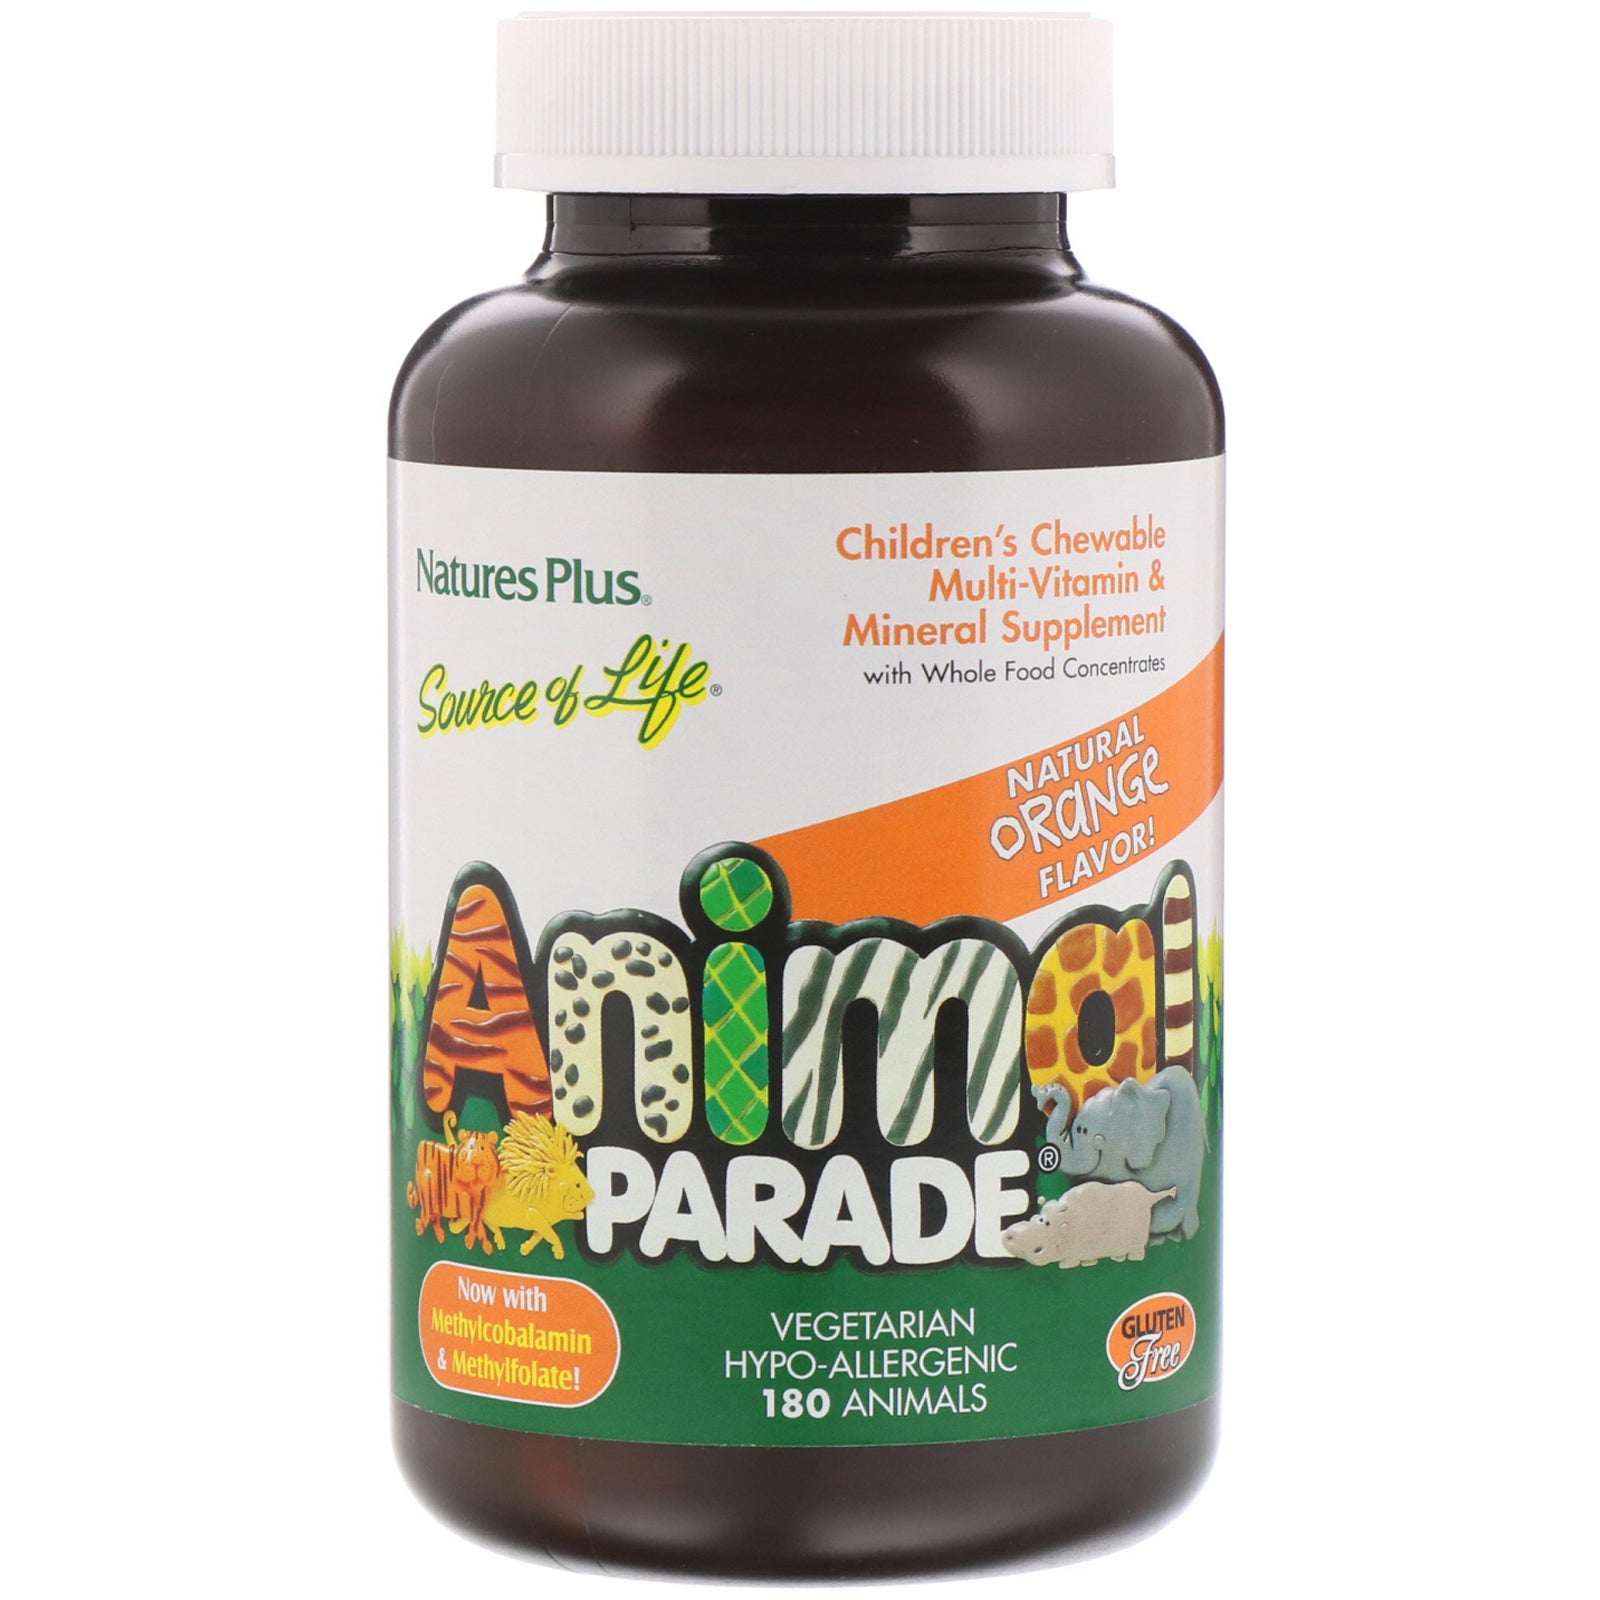 Nature's Plus, Source of Life, Animal Parade, Children's Chewable Multi-Vitamin and Mineral Supplement, Natural Orange Flavor, 180 Animals